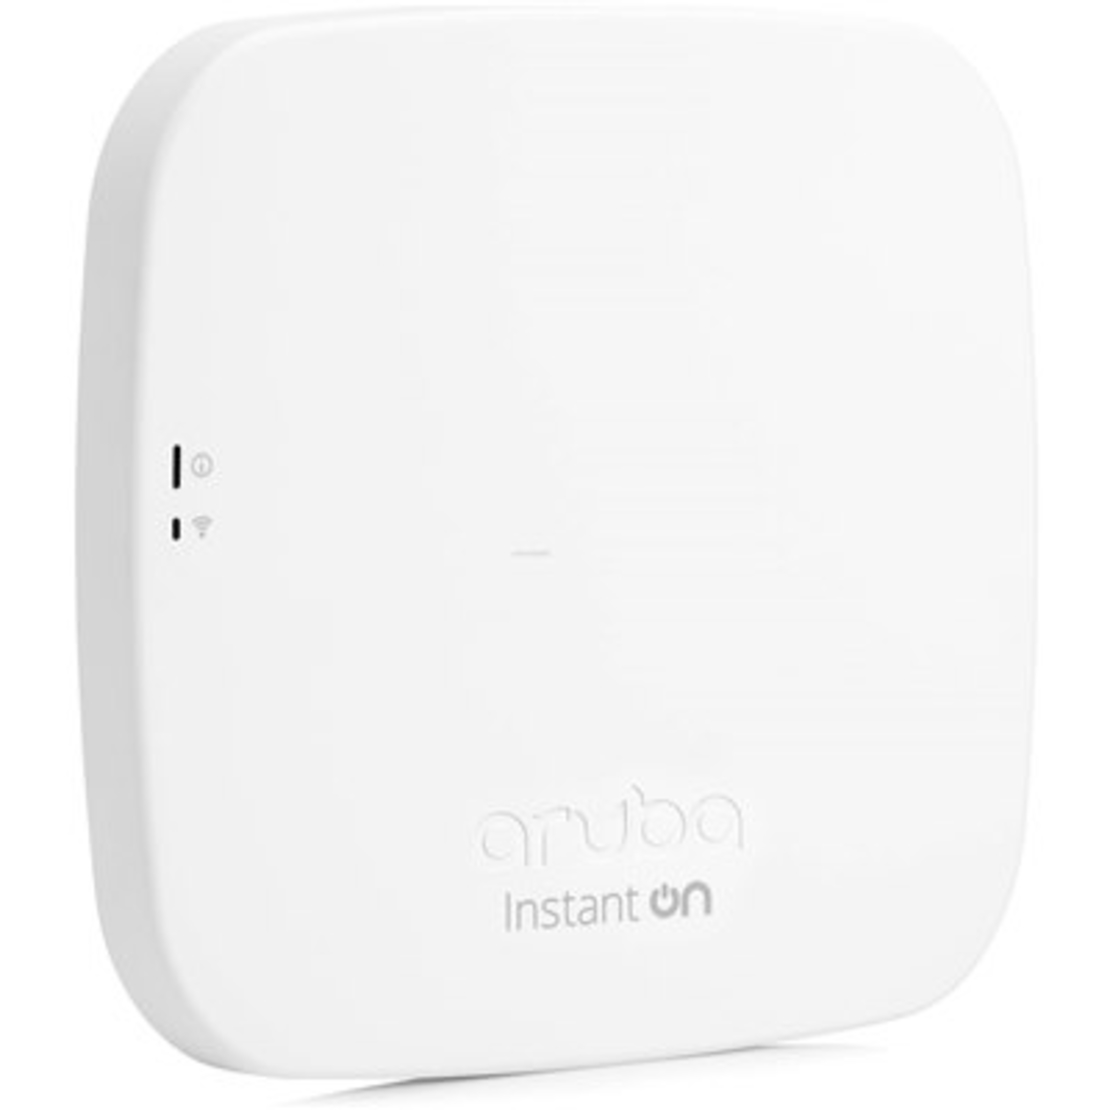 Aruba Instant on Access Point D.band AP11 W/POE HP